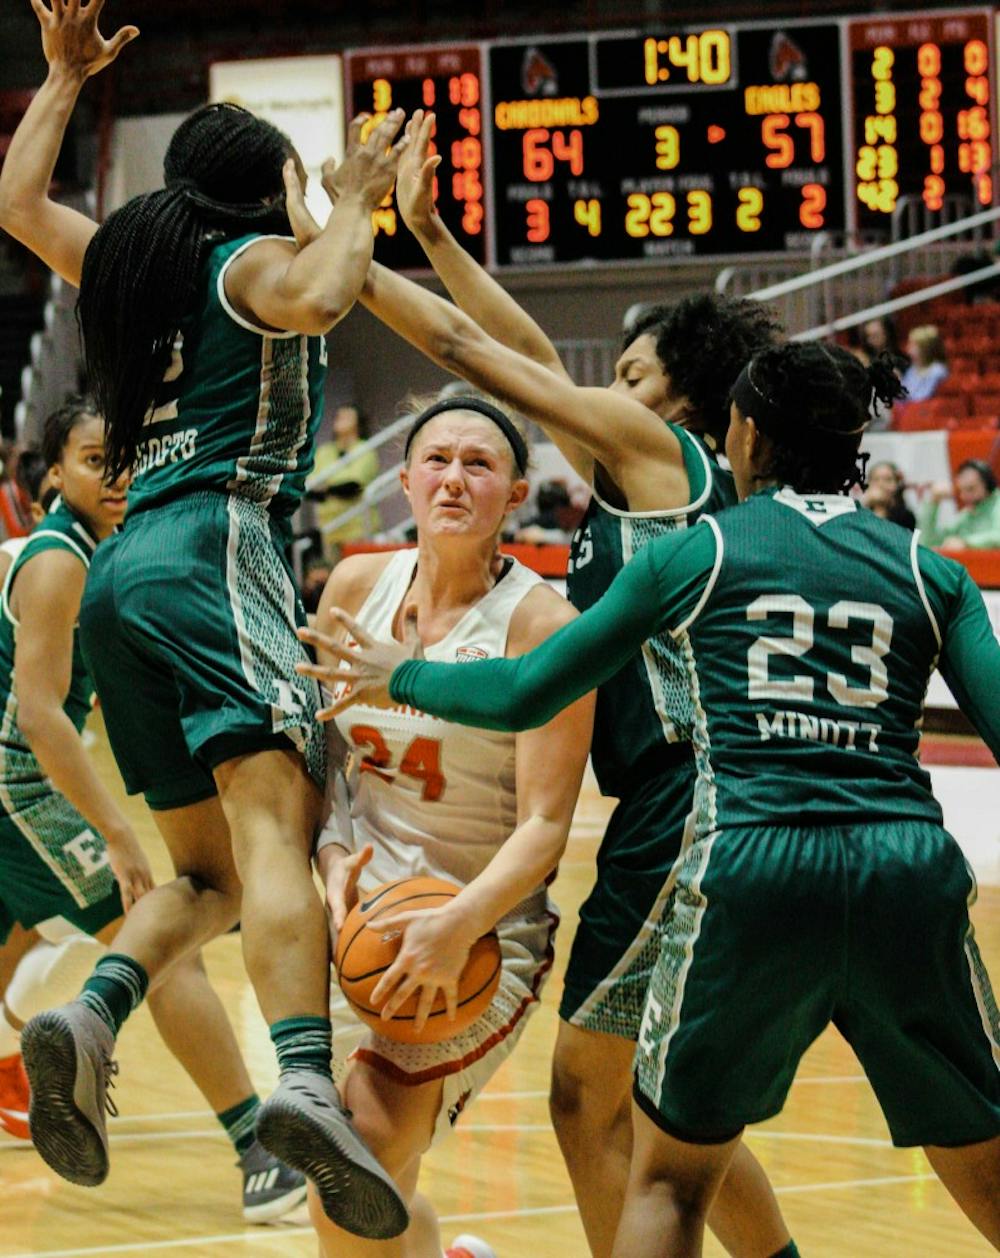 <p>Ball State senior Jasmin Samz pushes through the defense of the Eagles during the Ball State vs. Eastern Michigan Women’s Basketball game Feb. 7 in Worthen Arena. The cardinals lost their season opener to Purdue 80-38. <strong>Carlee Ellison, DN</strong></p>